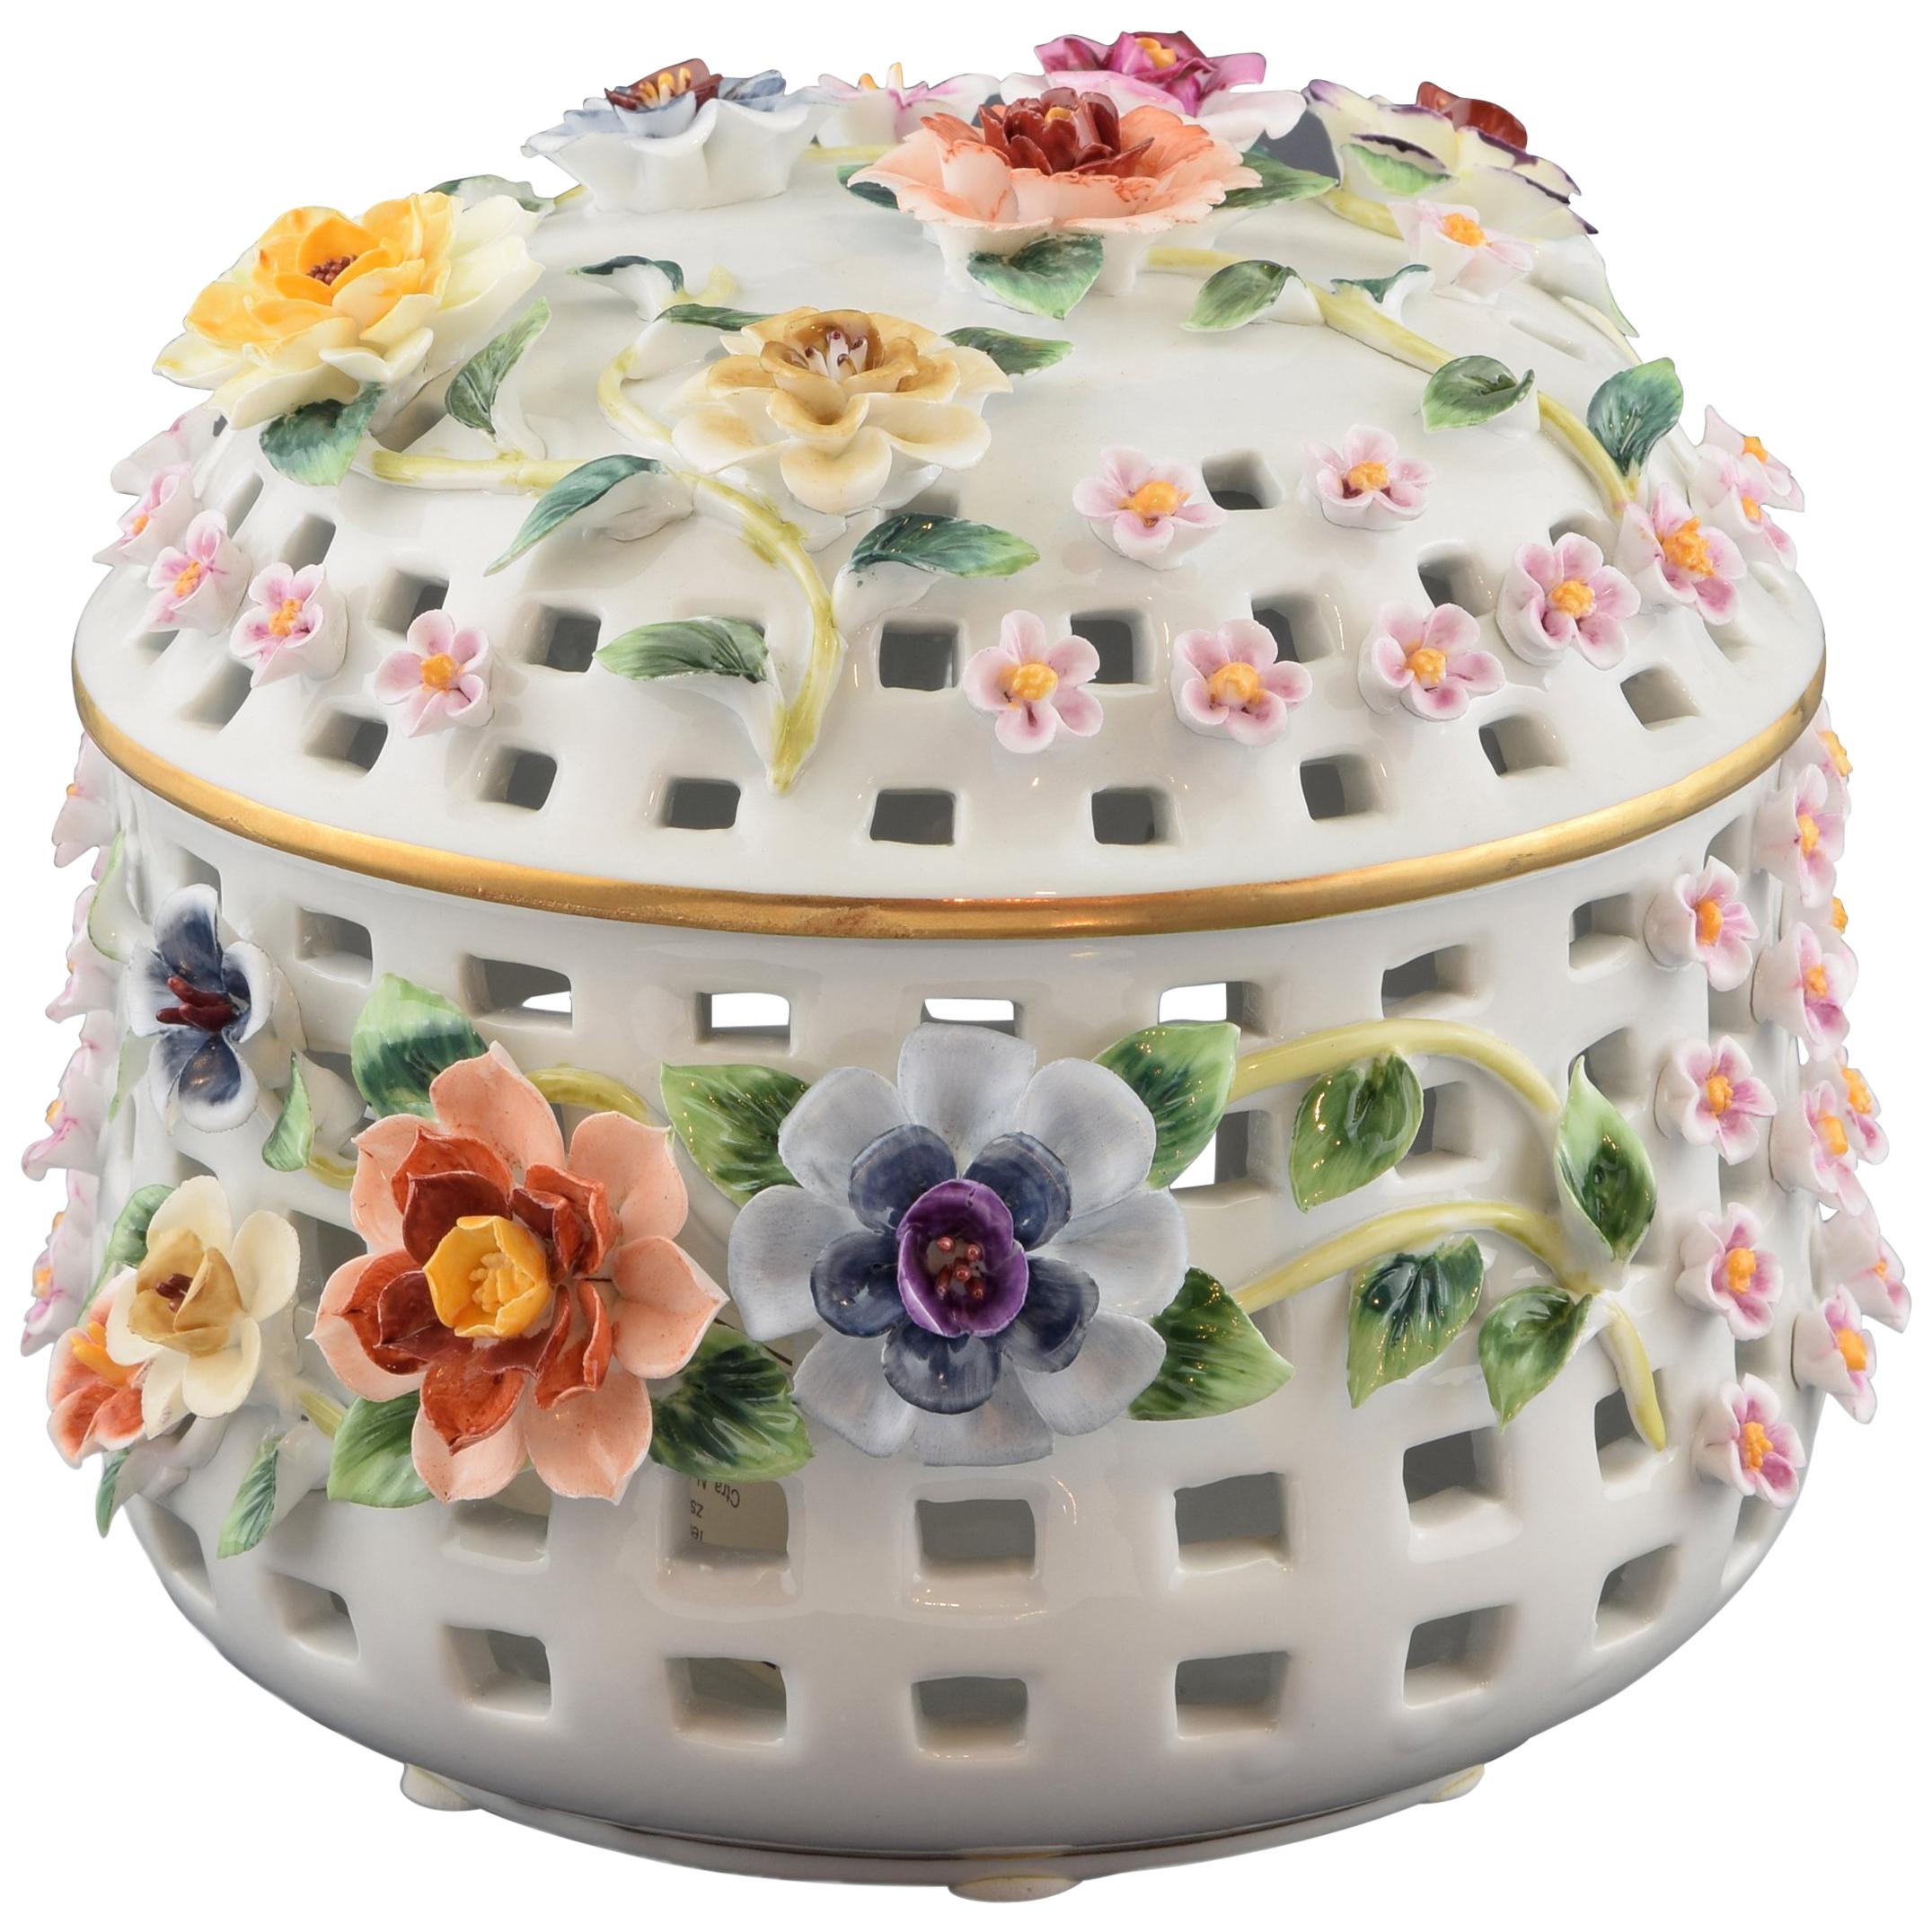 Porcelain Sweet Box with Flowers, after Models from Sèvres 'France'